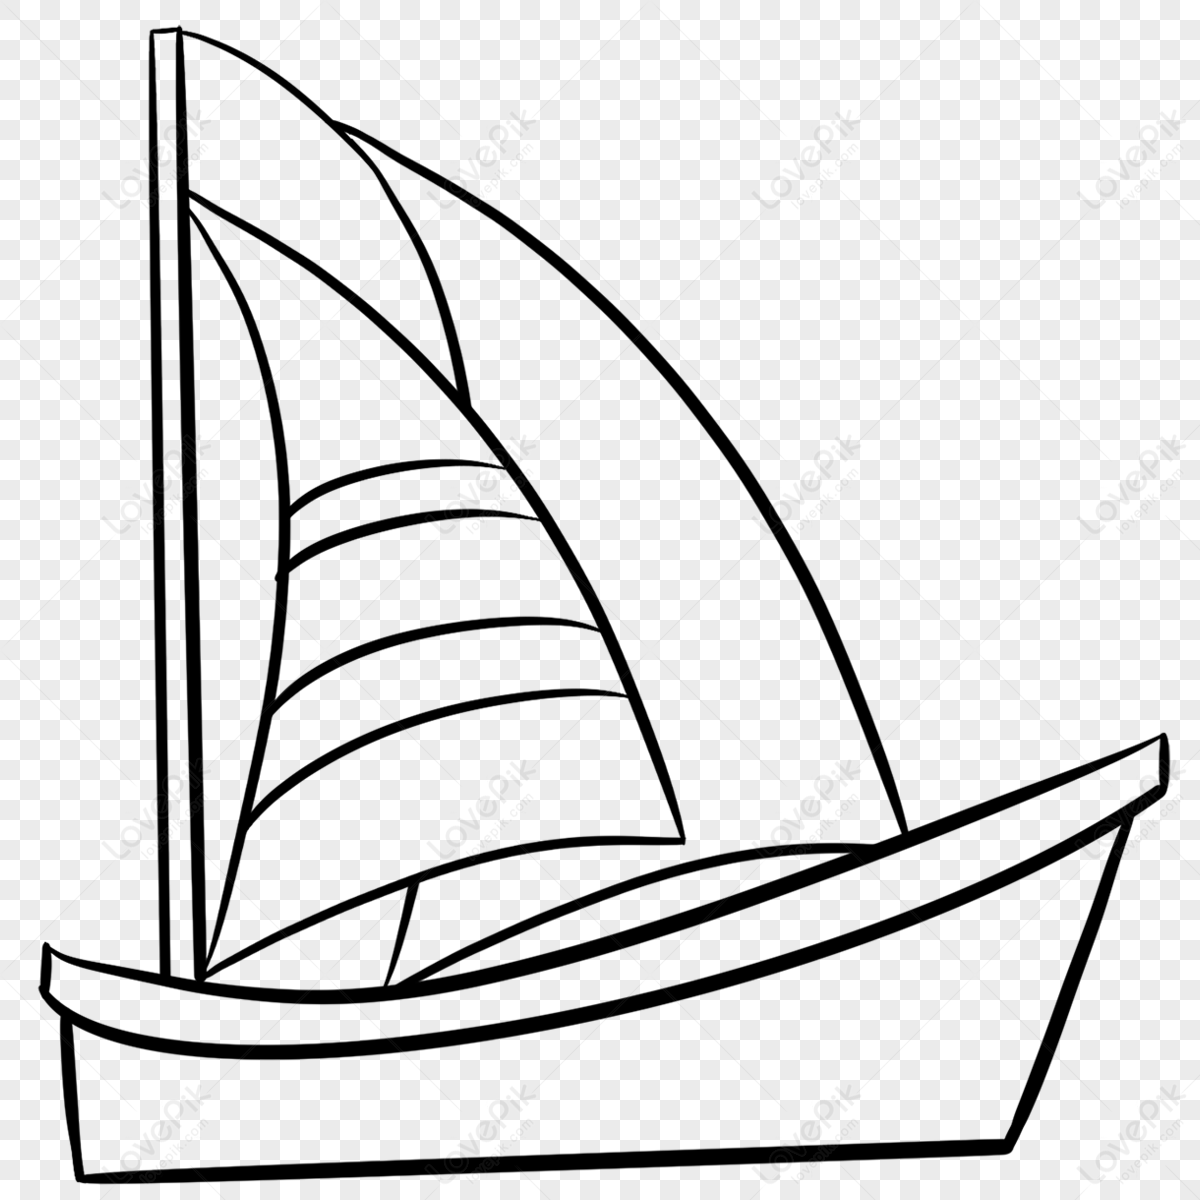 Cute little sailboat clipart black and white,ferry png transparent image